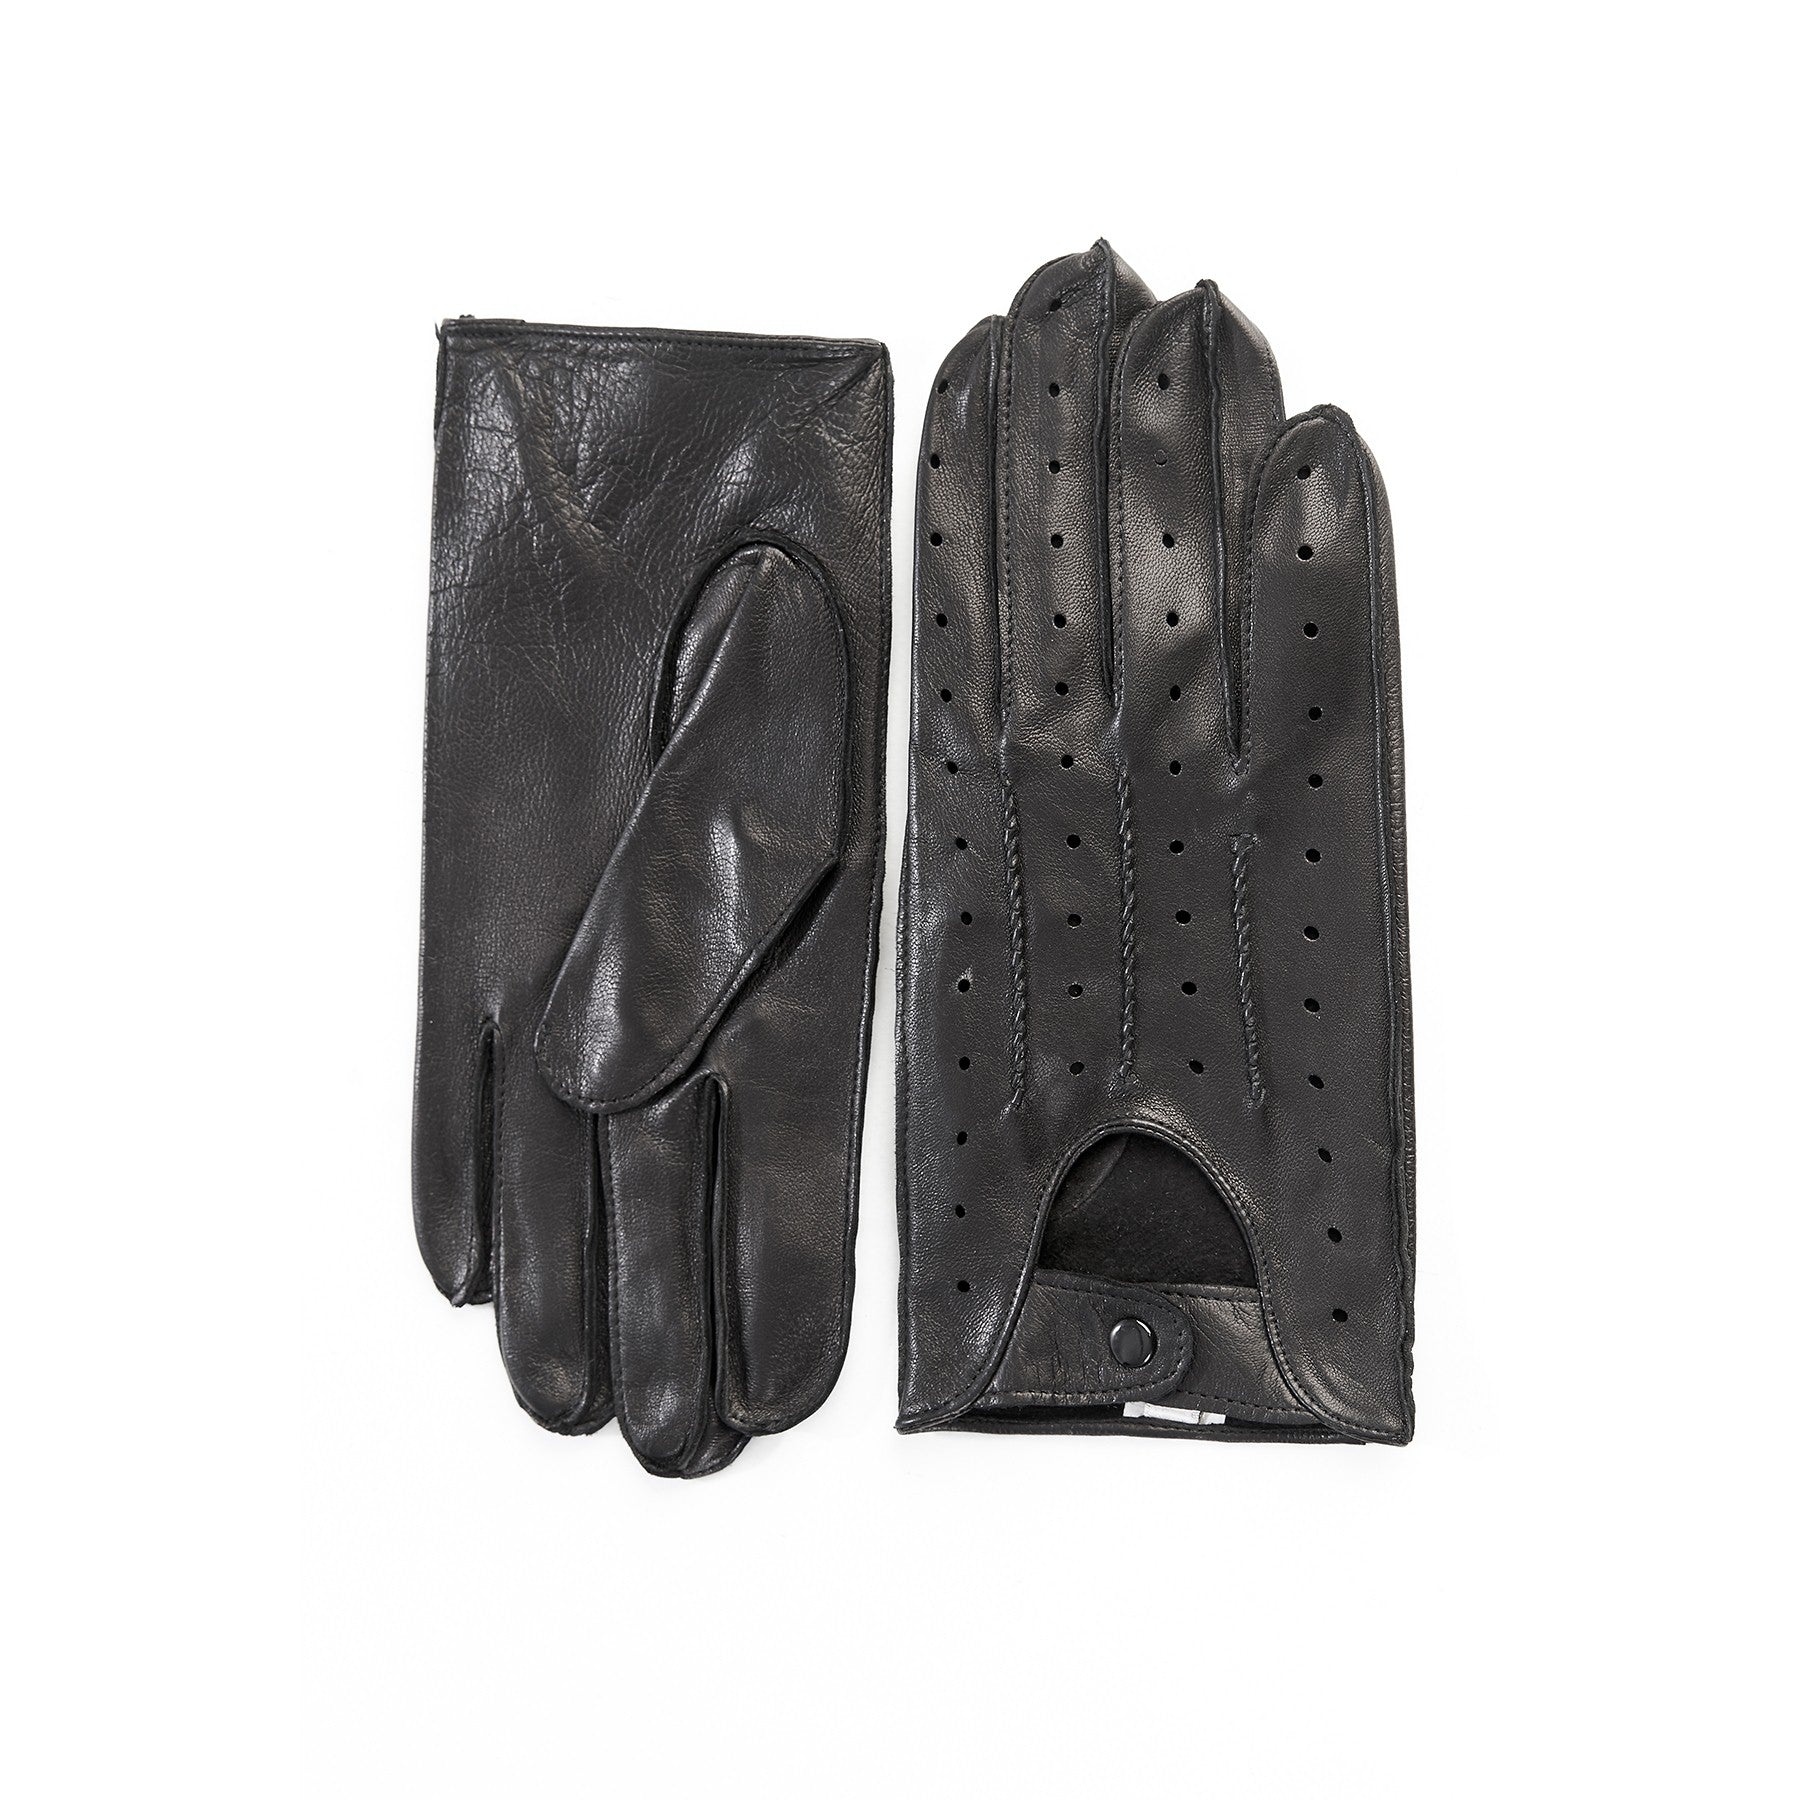 Men's unlined black leather driving gloves with button closure